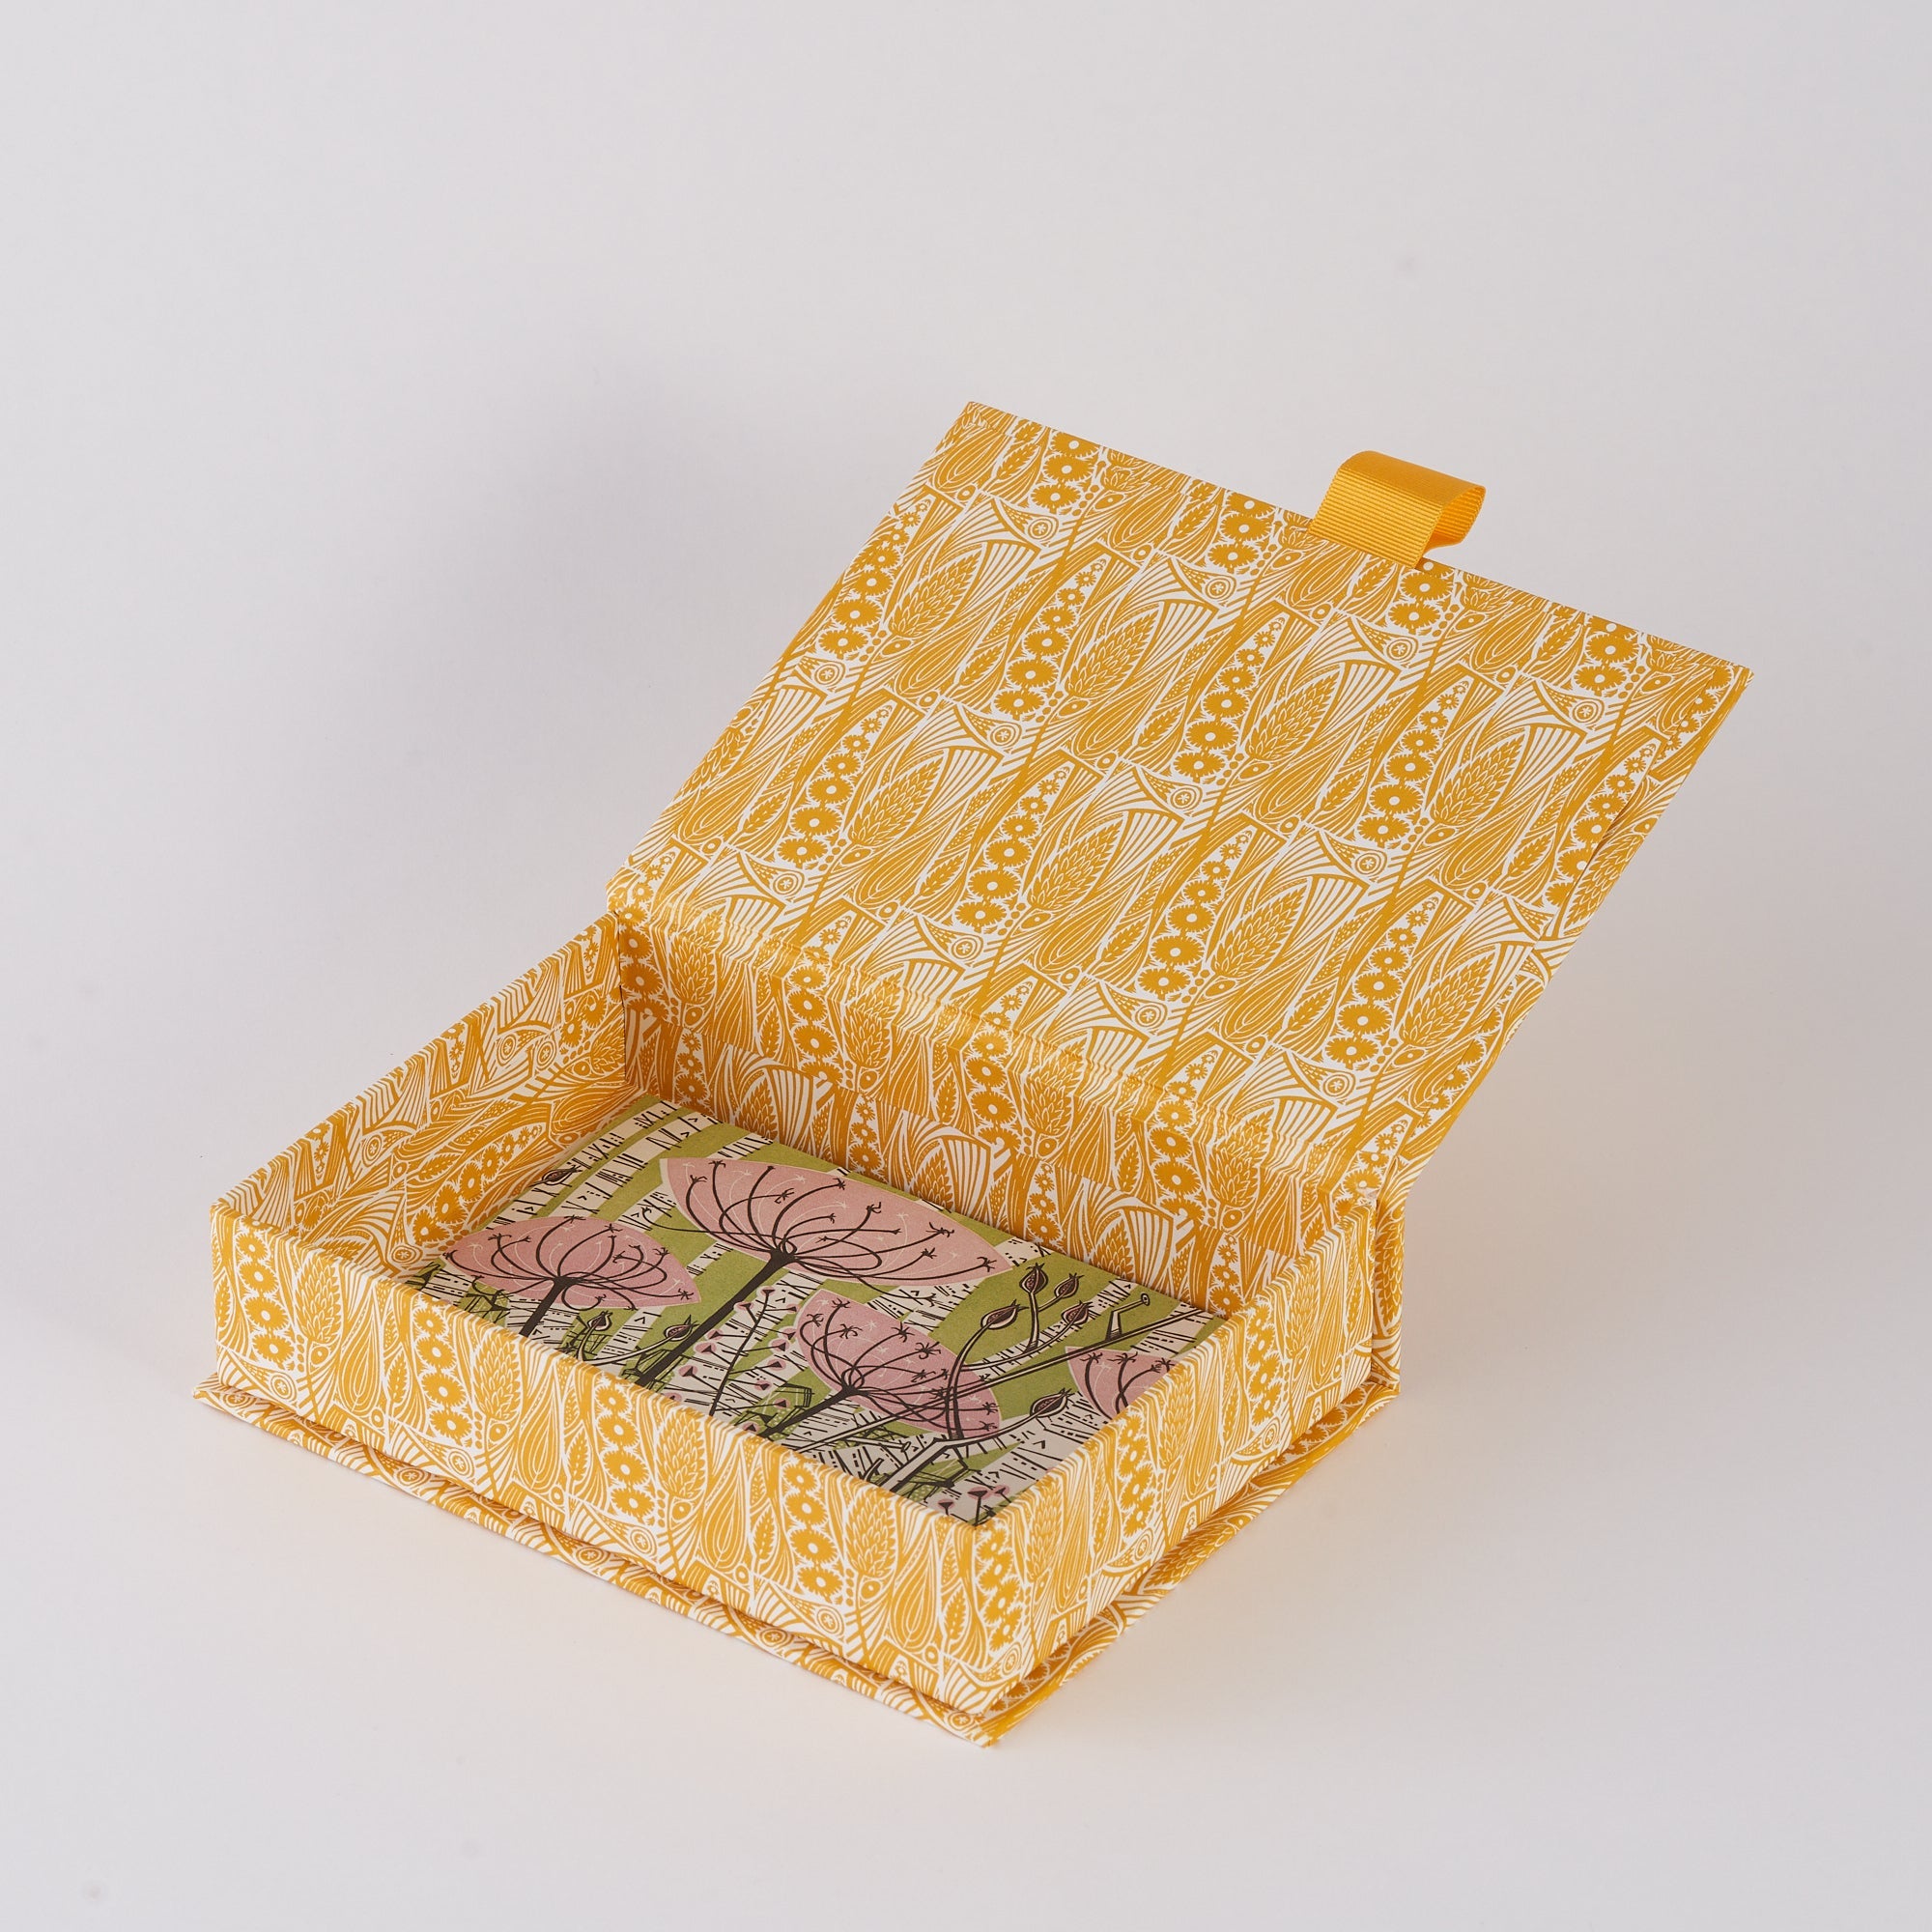 Meadow Grass Patterned Paper Box - Angie Lewin - St. Jude's Prints